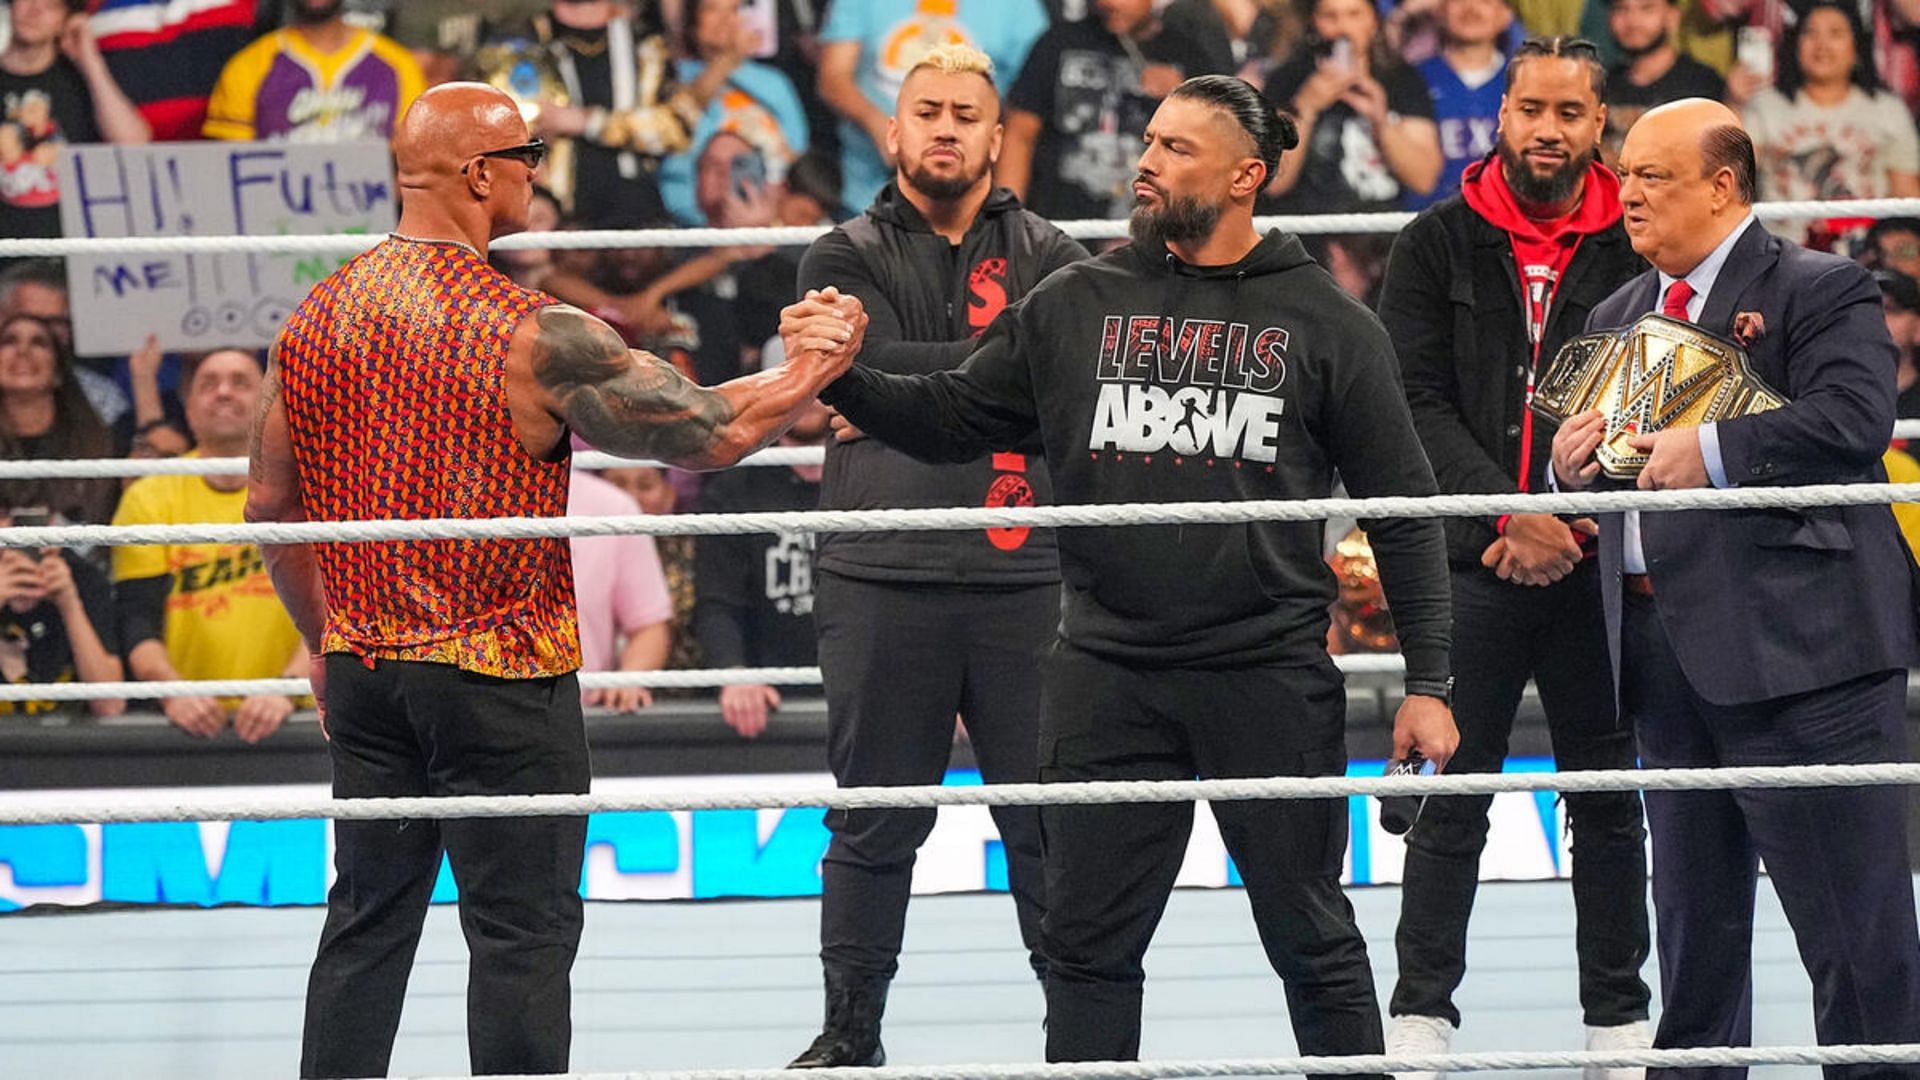 The Rock previously acknowledged Roman Reigns on WWE SmackDown